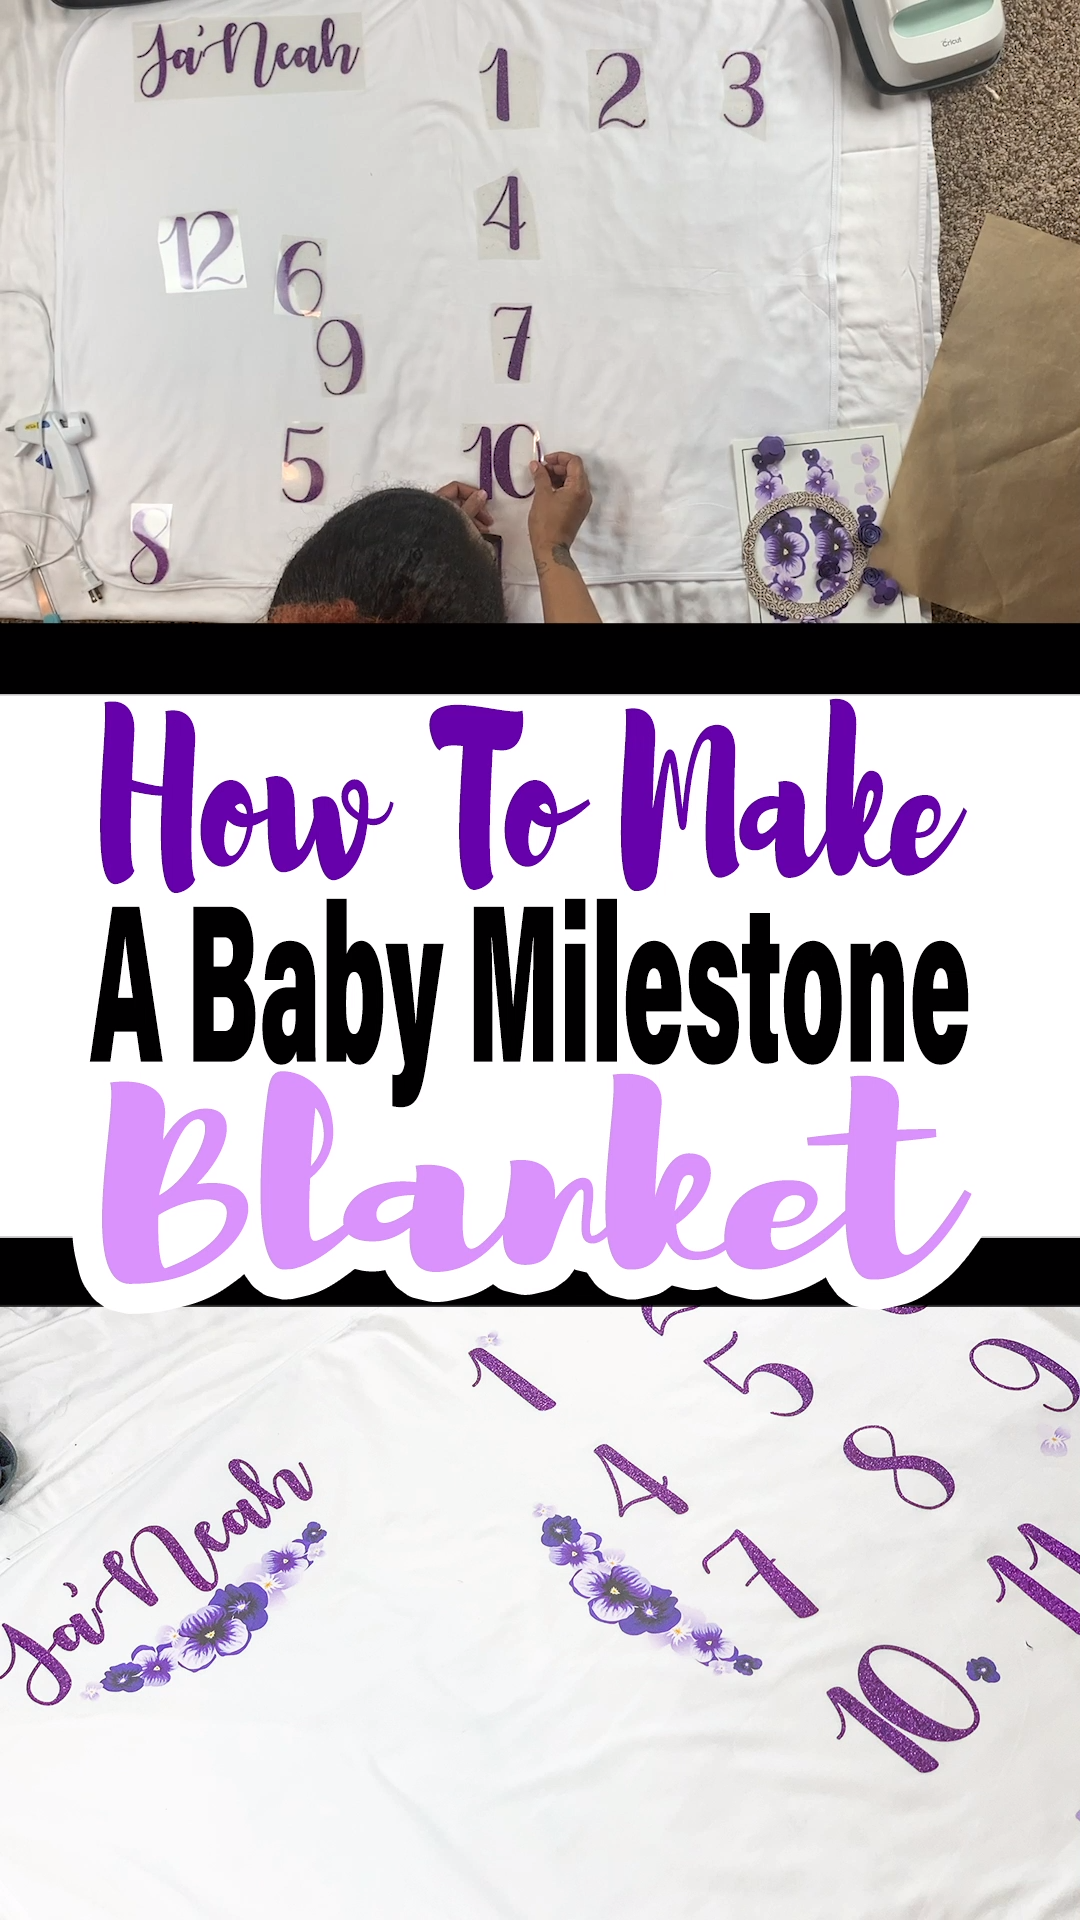 How To Make A Baby Milestone Blanket - How To Make A Baby Milestone Blanket -   15 diy Baby crafts ideas